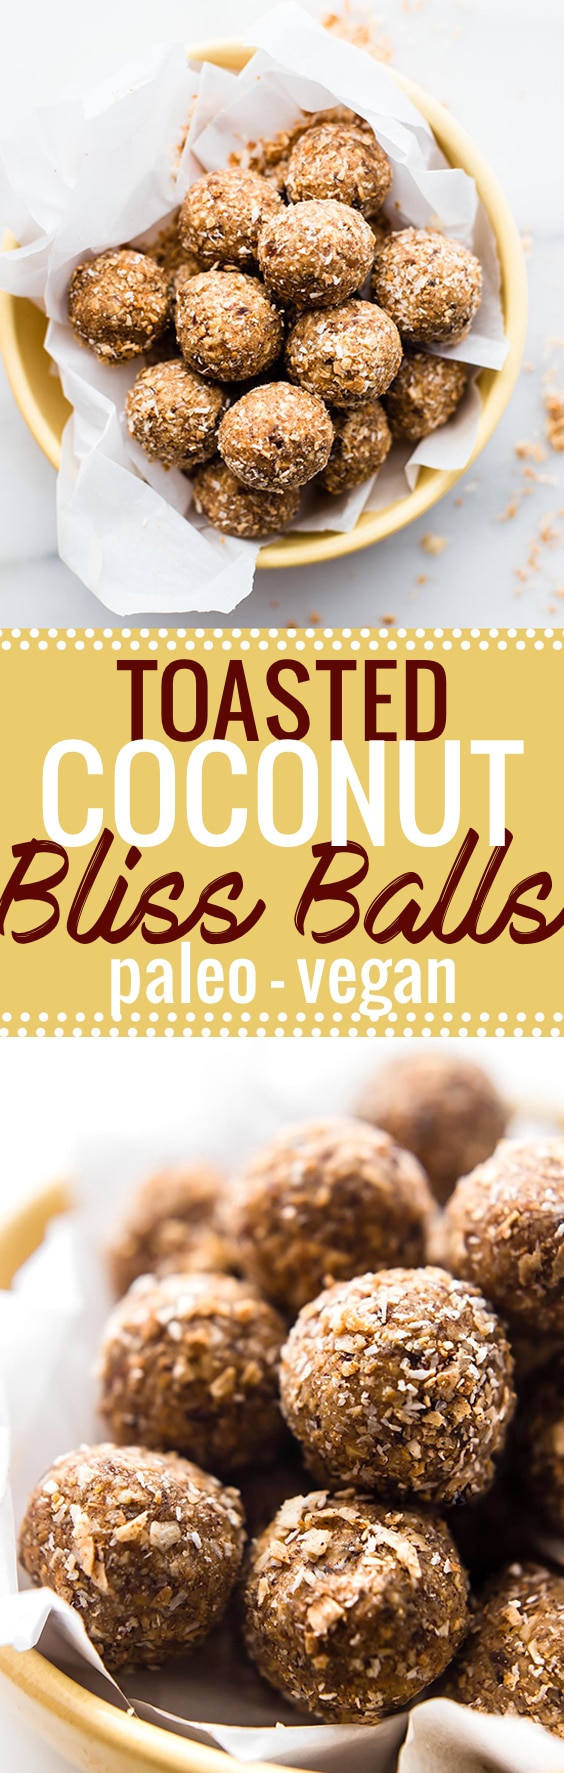 Toasted Coconut Bliss balls. A quick sweet and salty snack ball recipe made with cinnamon toasted coconut, dates, cashews, and cinnamon! The perfect bite size healthy treat that's Paleo and Vegan friendly. Crunchy, chewy, and naturally sweetened. www.cottercrunch.com @cottercrunch